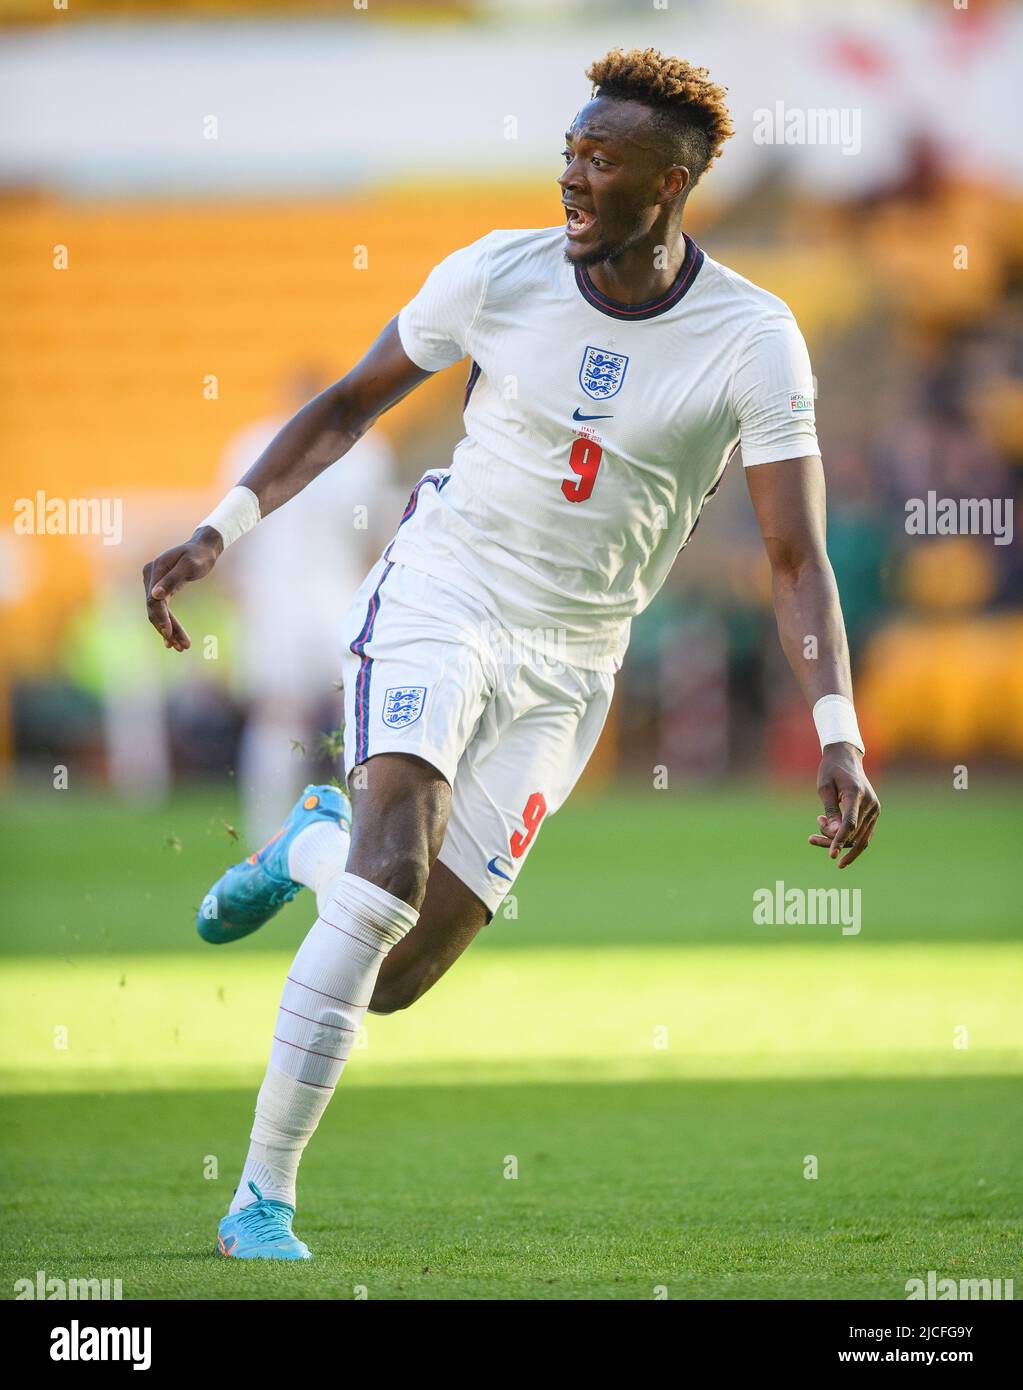 11 Jun 2022 - England v Italy - UEFA Nations League - Group 3 - Molineux Stadium  England's Tammy Abraham during the match against Italy. Picture Credit : © Mark Pain / Alamy Live News Stock Photo